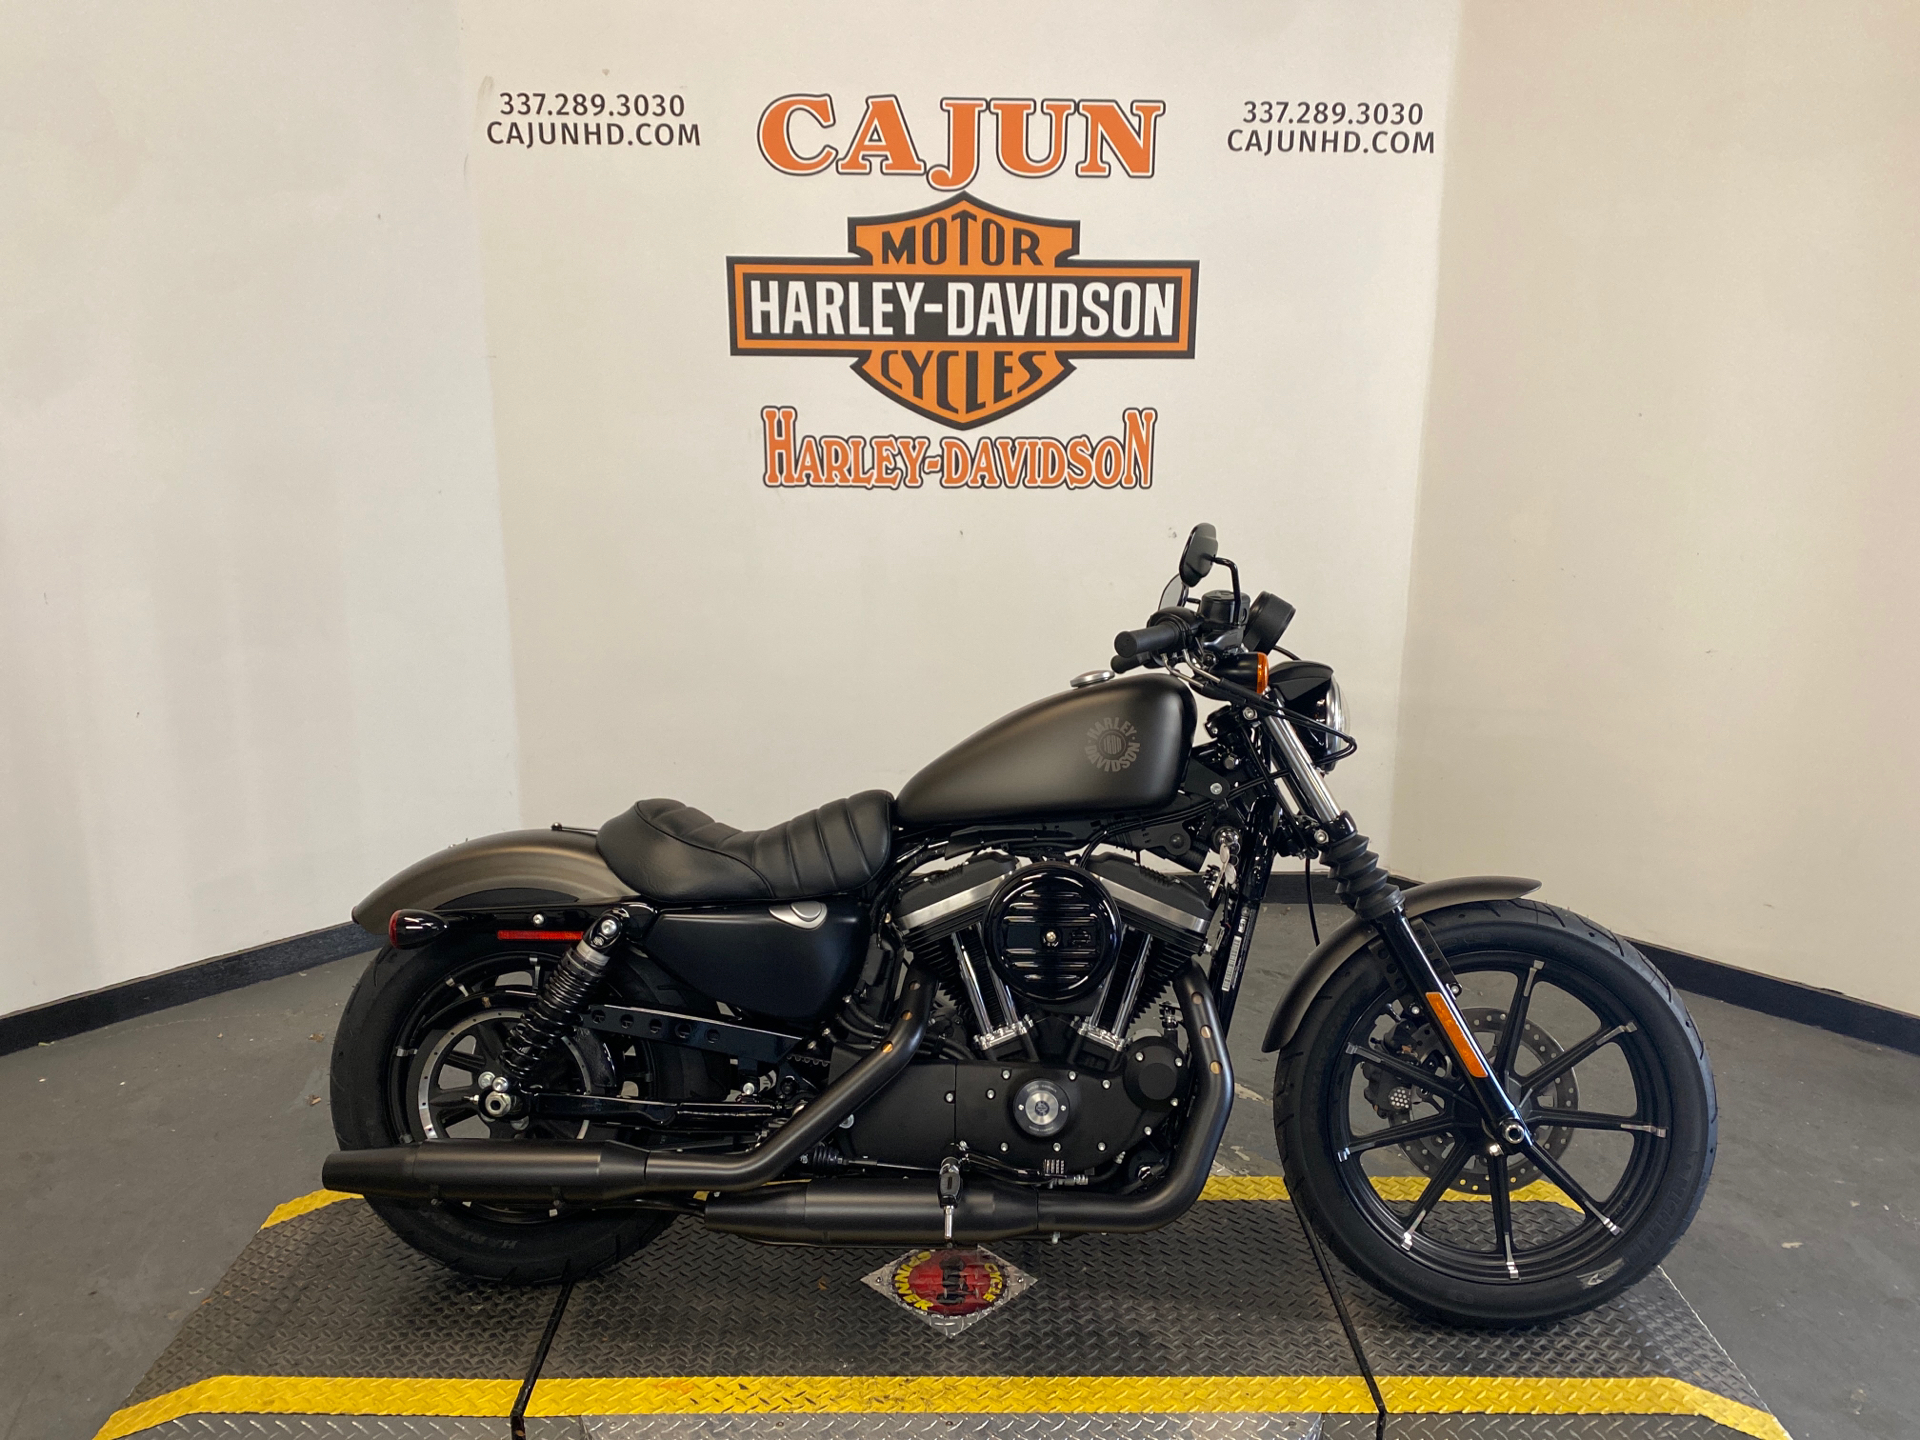 Harley Davidson Iron 883 Insurance Cost Promotion Off58